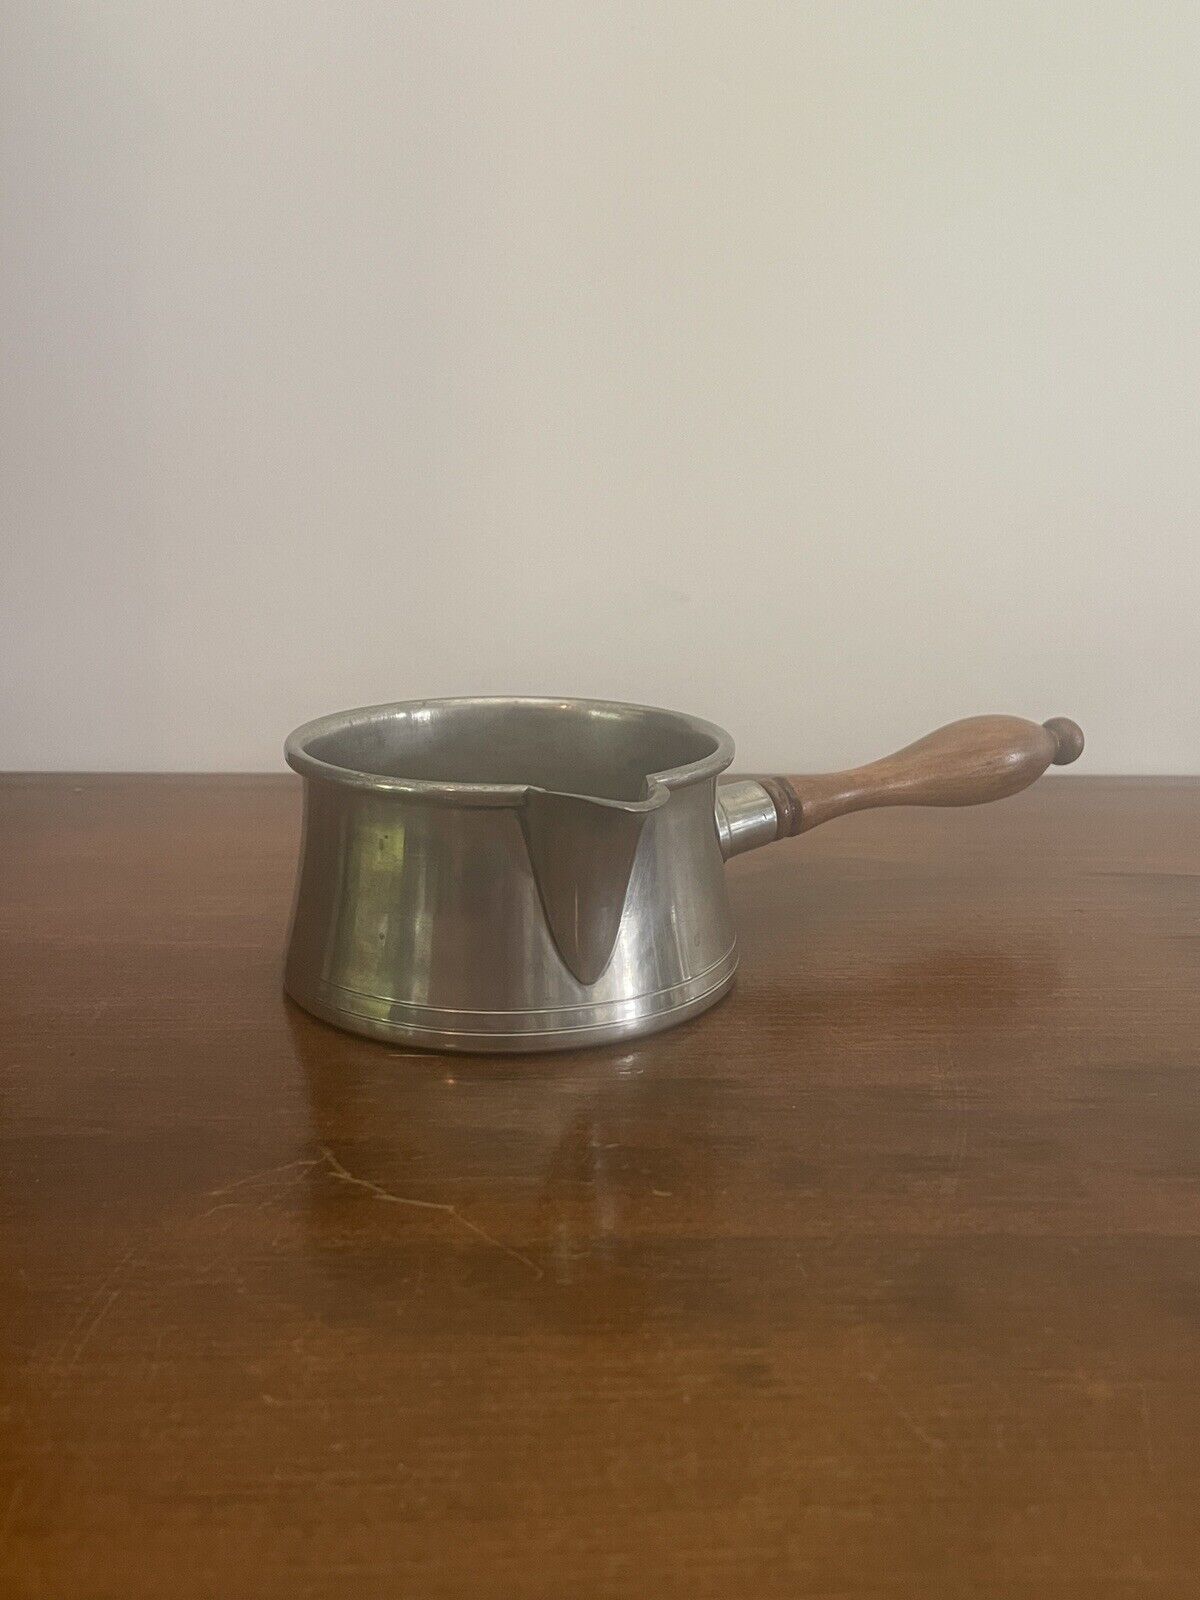 Pewter Pipkin from Woodbury Pewterers Butter Warmer/gravy small pot pan